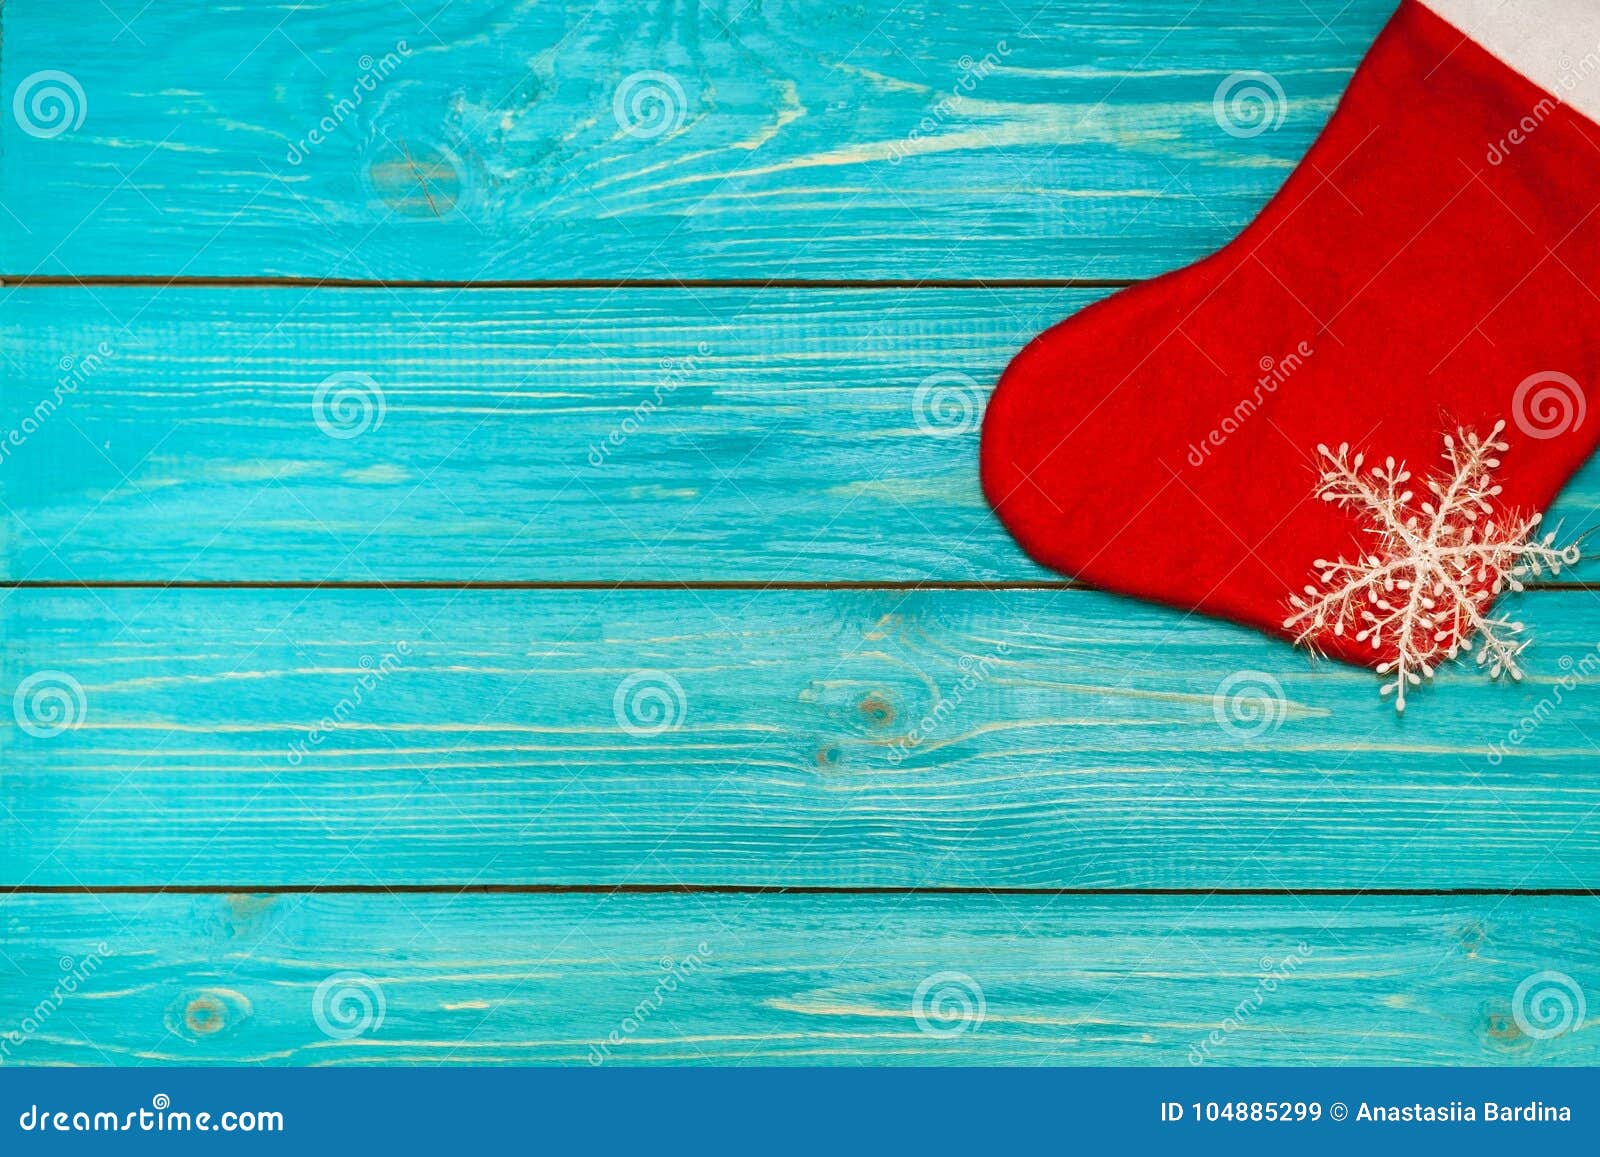 Christmas Sock with Gifts on Wooden Turquoise Background Stock Image ...